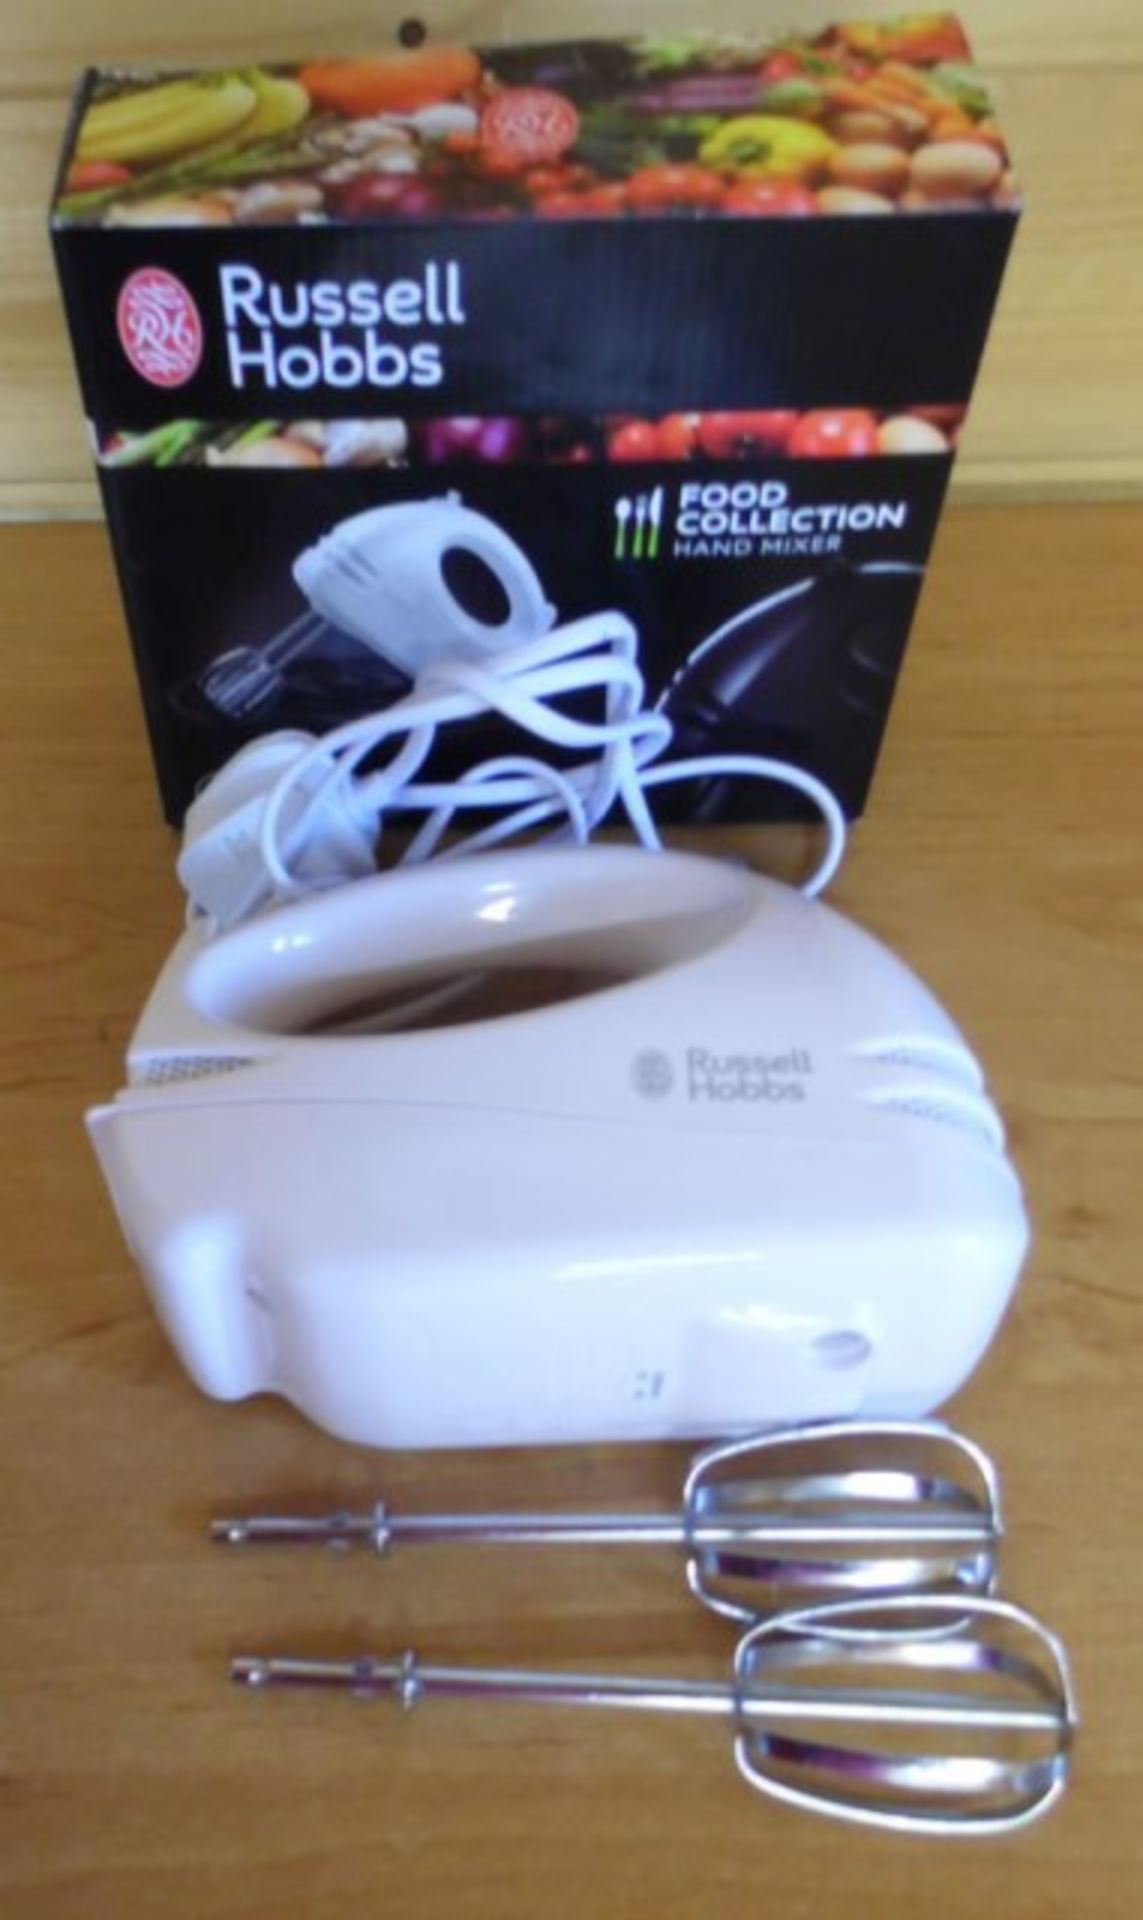 V Grade C Russell Hobbs Food Collection Hand Mixer